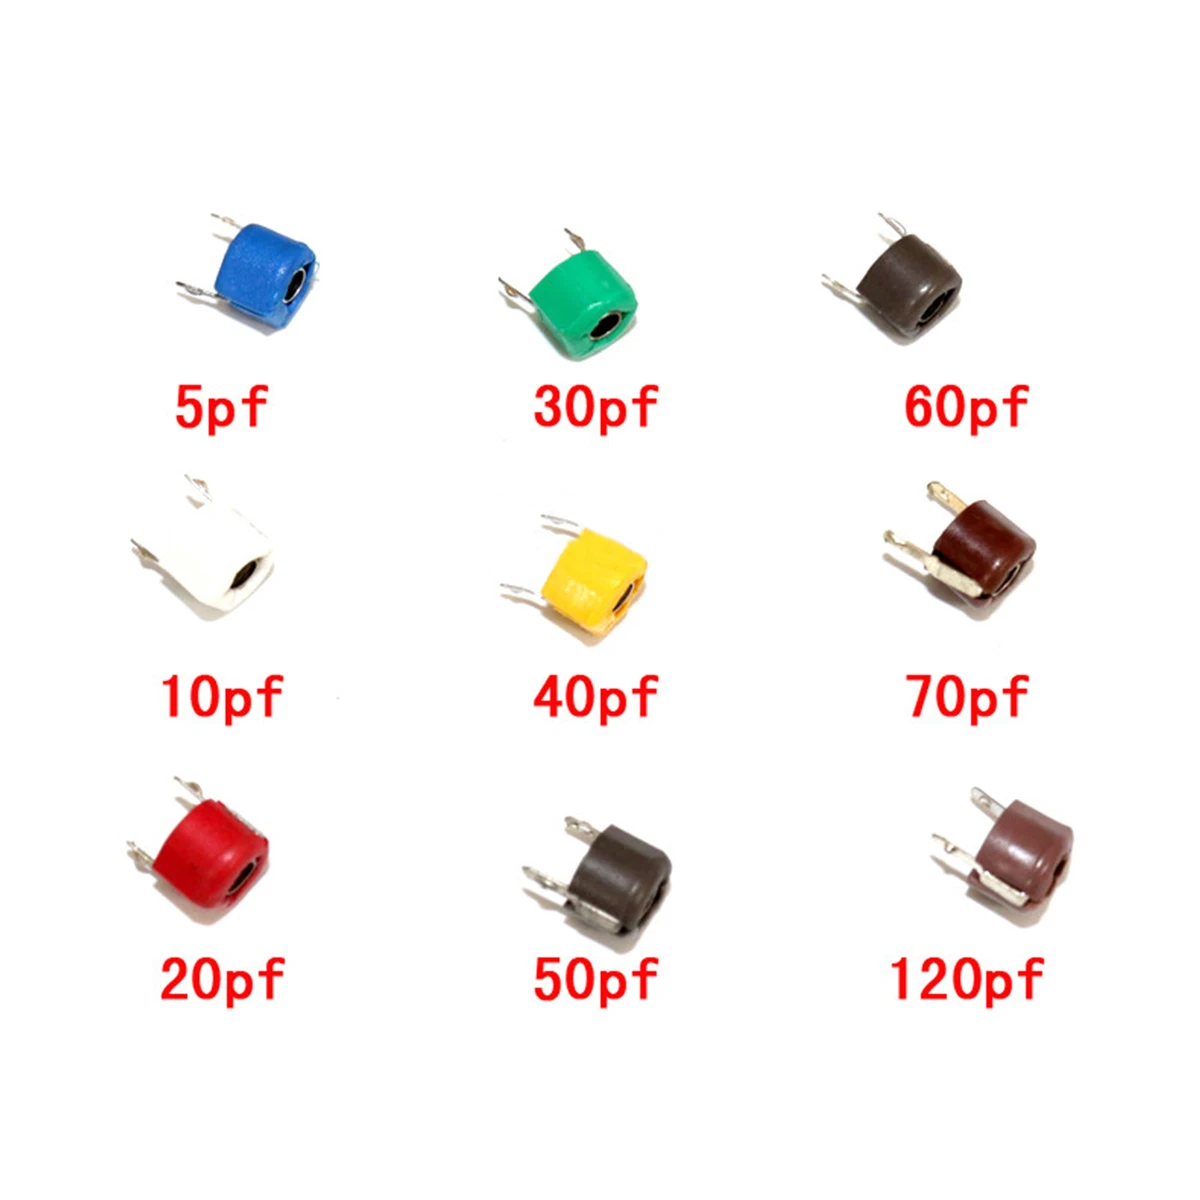 45 Pcs Trimmer Capacitor Kit Assorted 9 Values Adjustable Variable Capacitors 